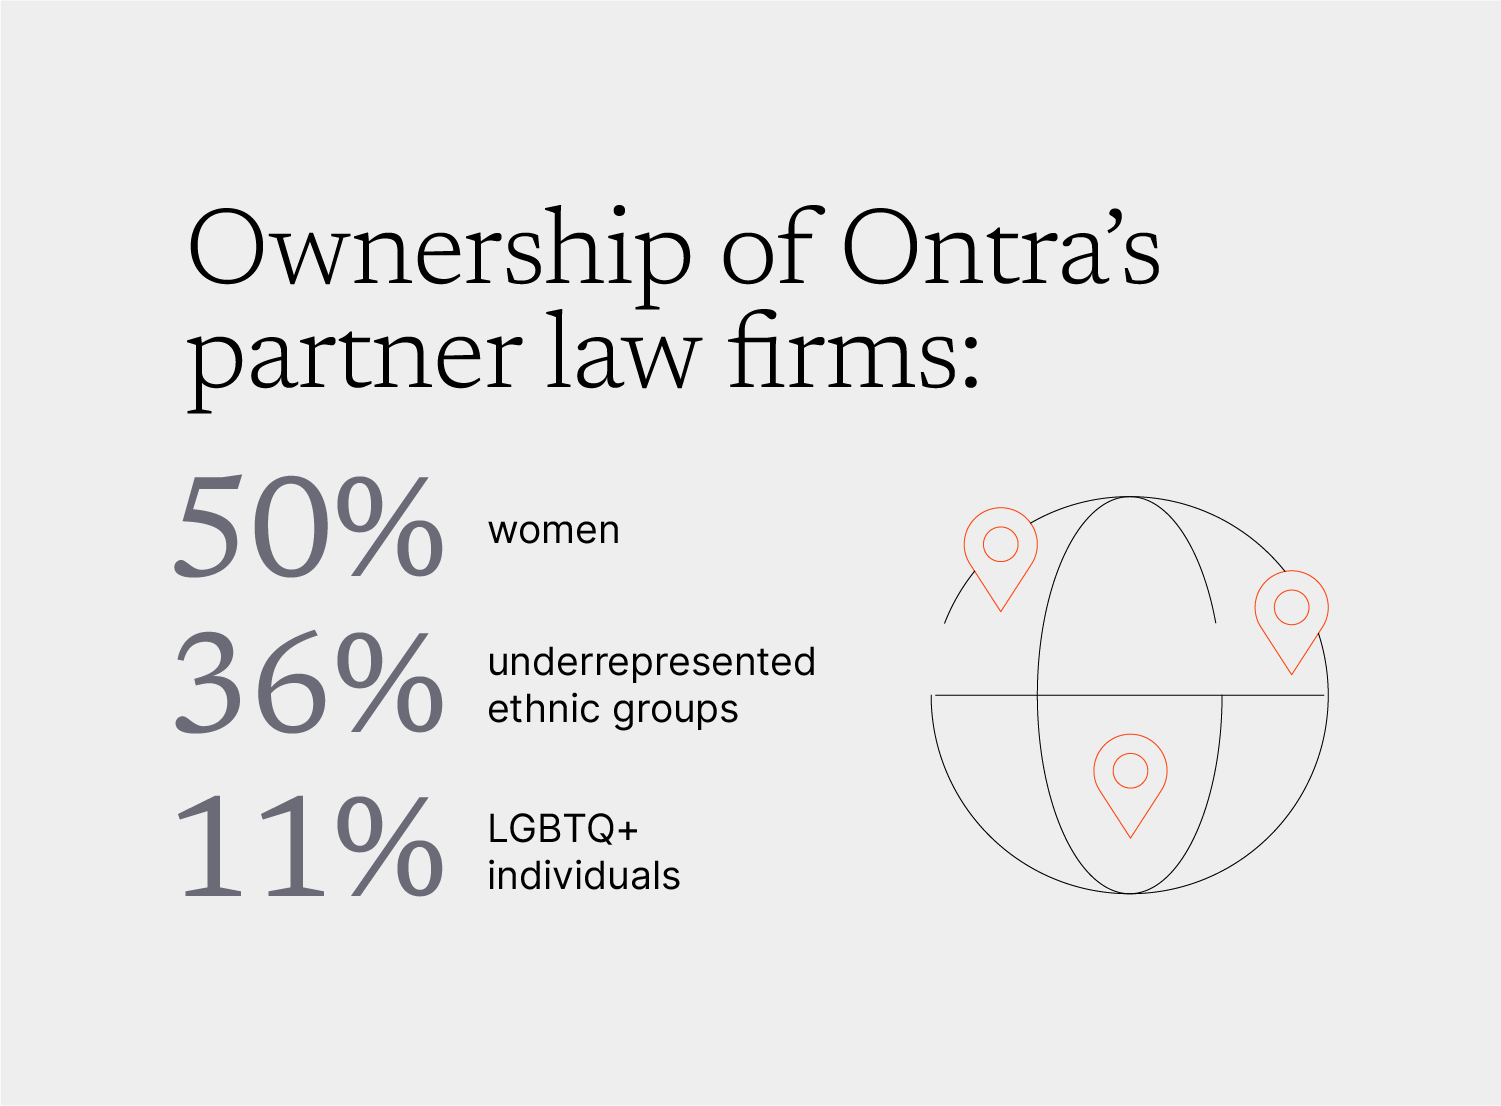 Women own over 50% of Ontra’s partner law firms, underrepresented ethnic groups own 36%, and LGTBQ+ individuals own 11%